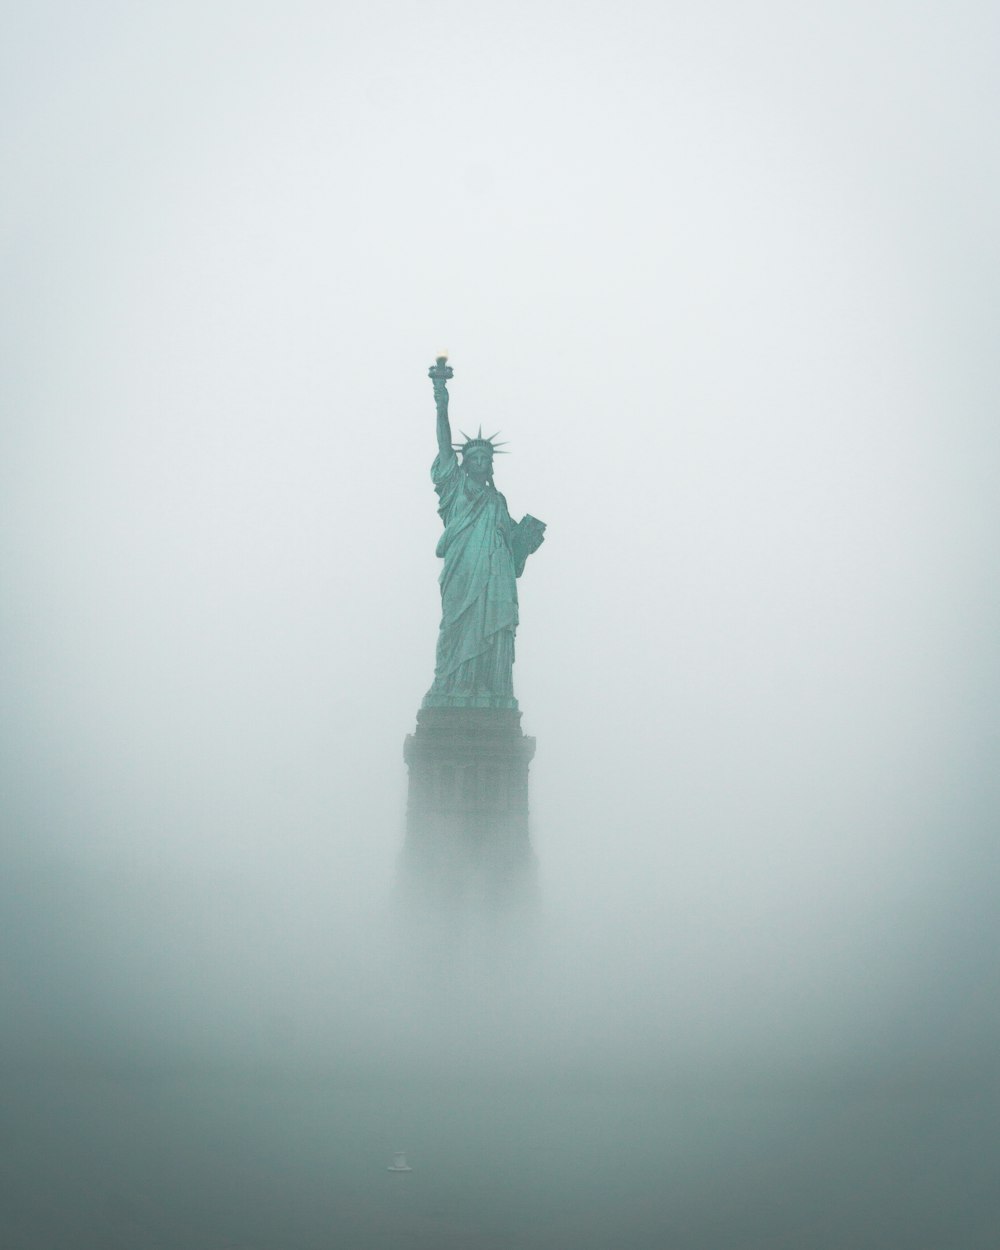 the statue of liberty is surrounded by fog